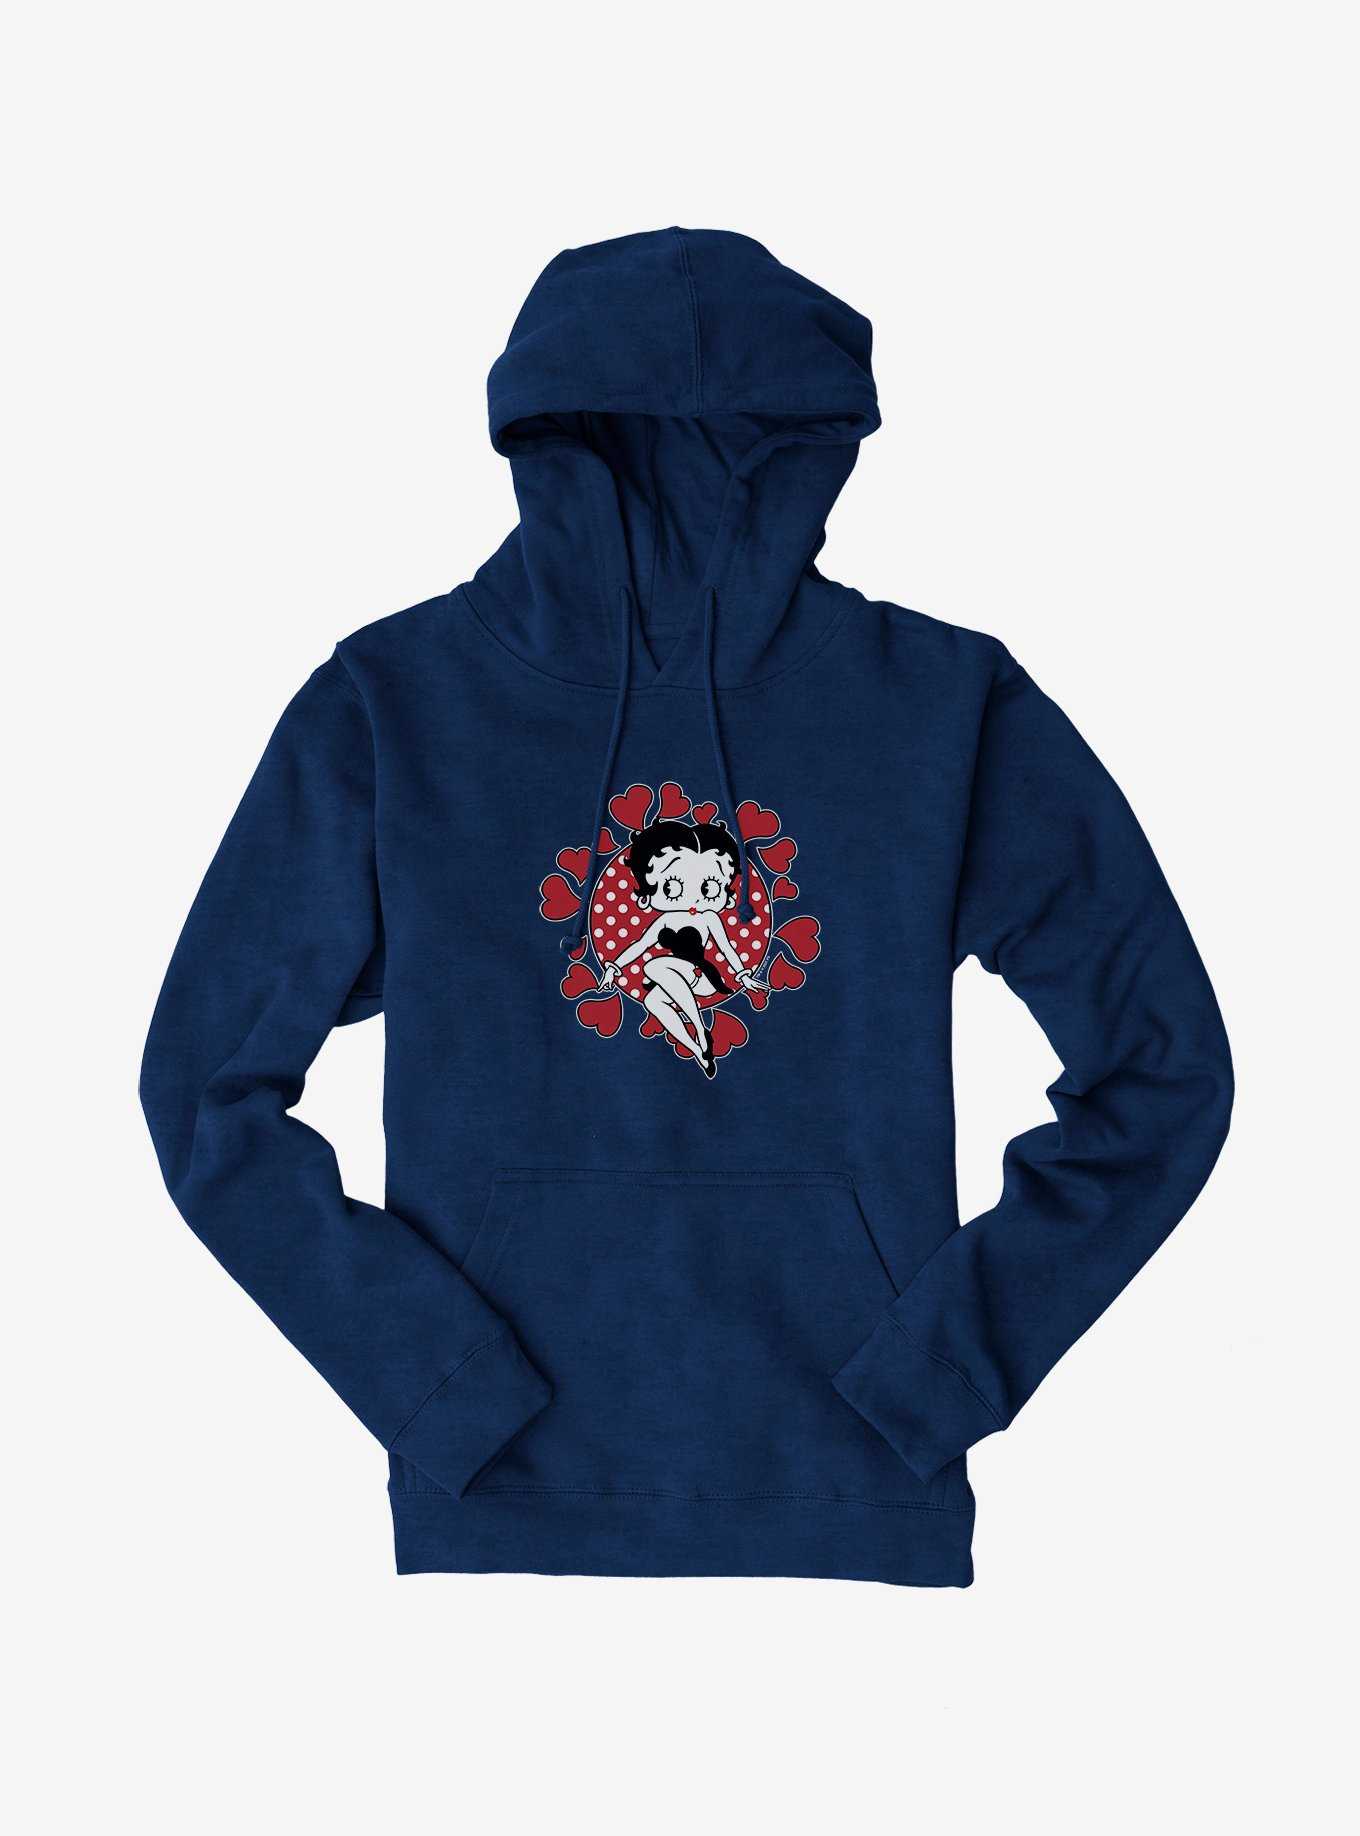 Betty Boop Surrounded By Love Hoodie, , hi-res